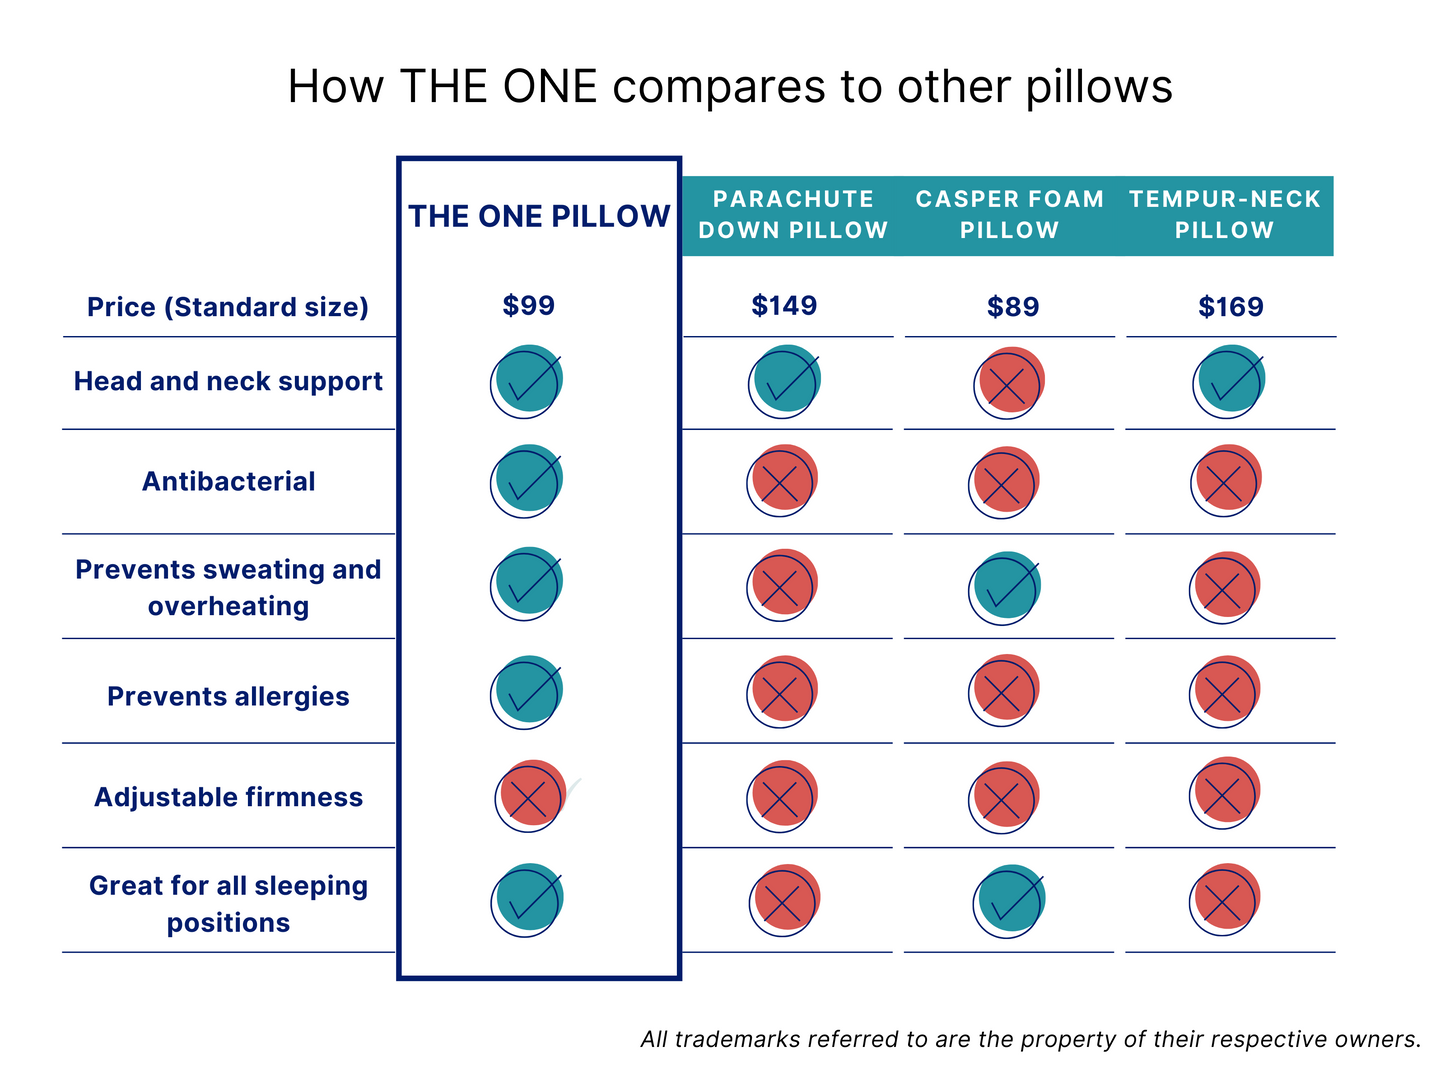 The One Pillow